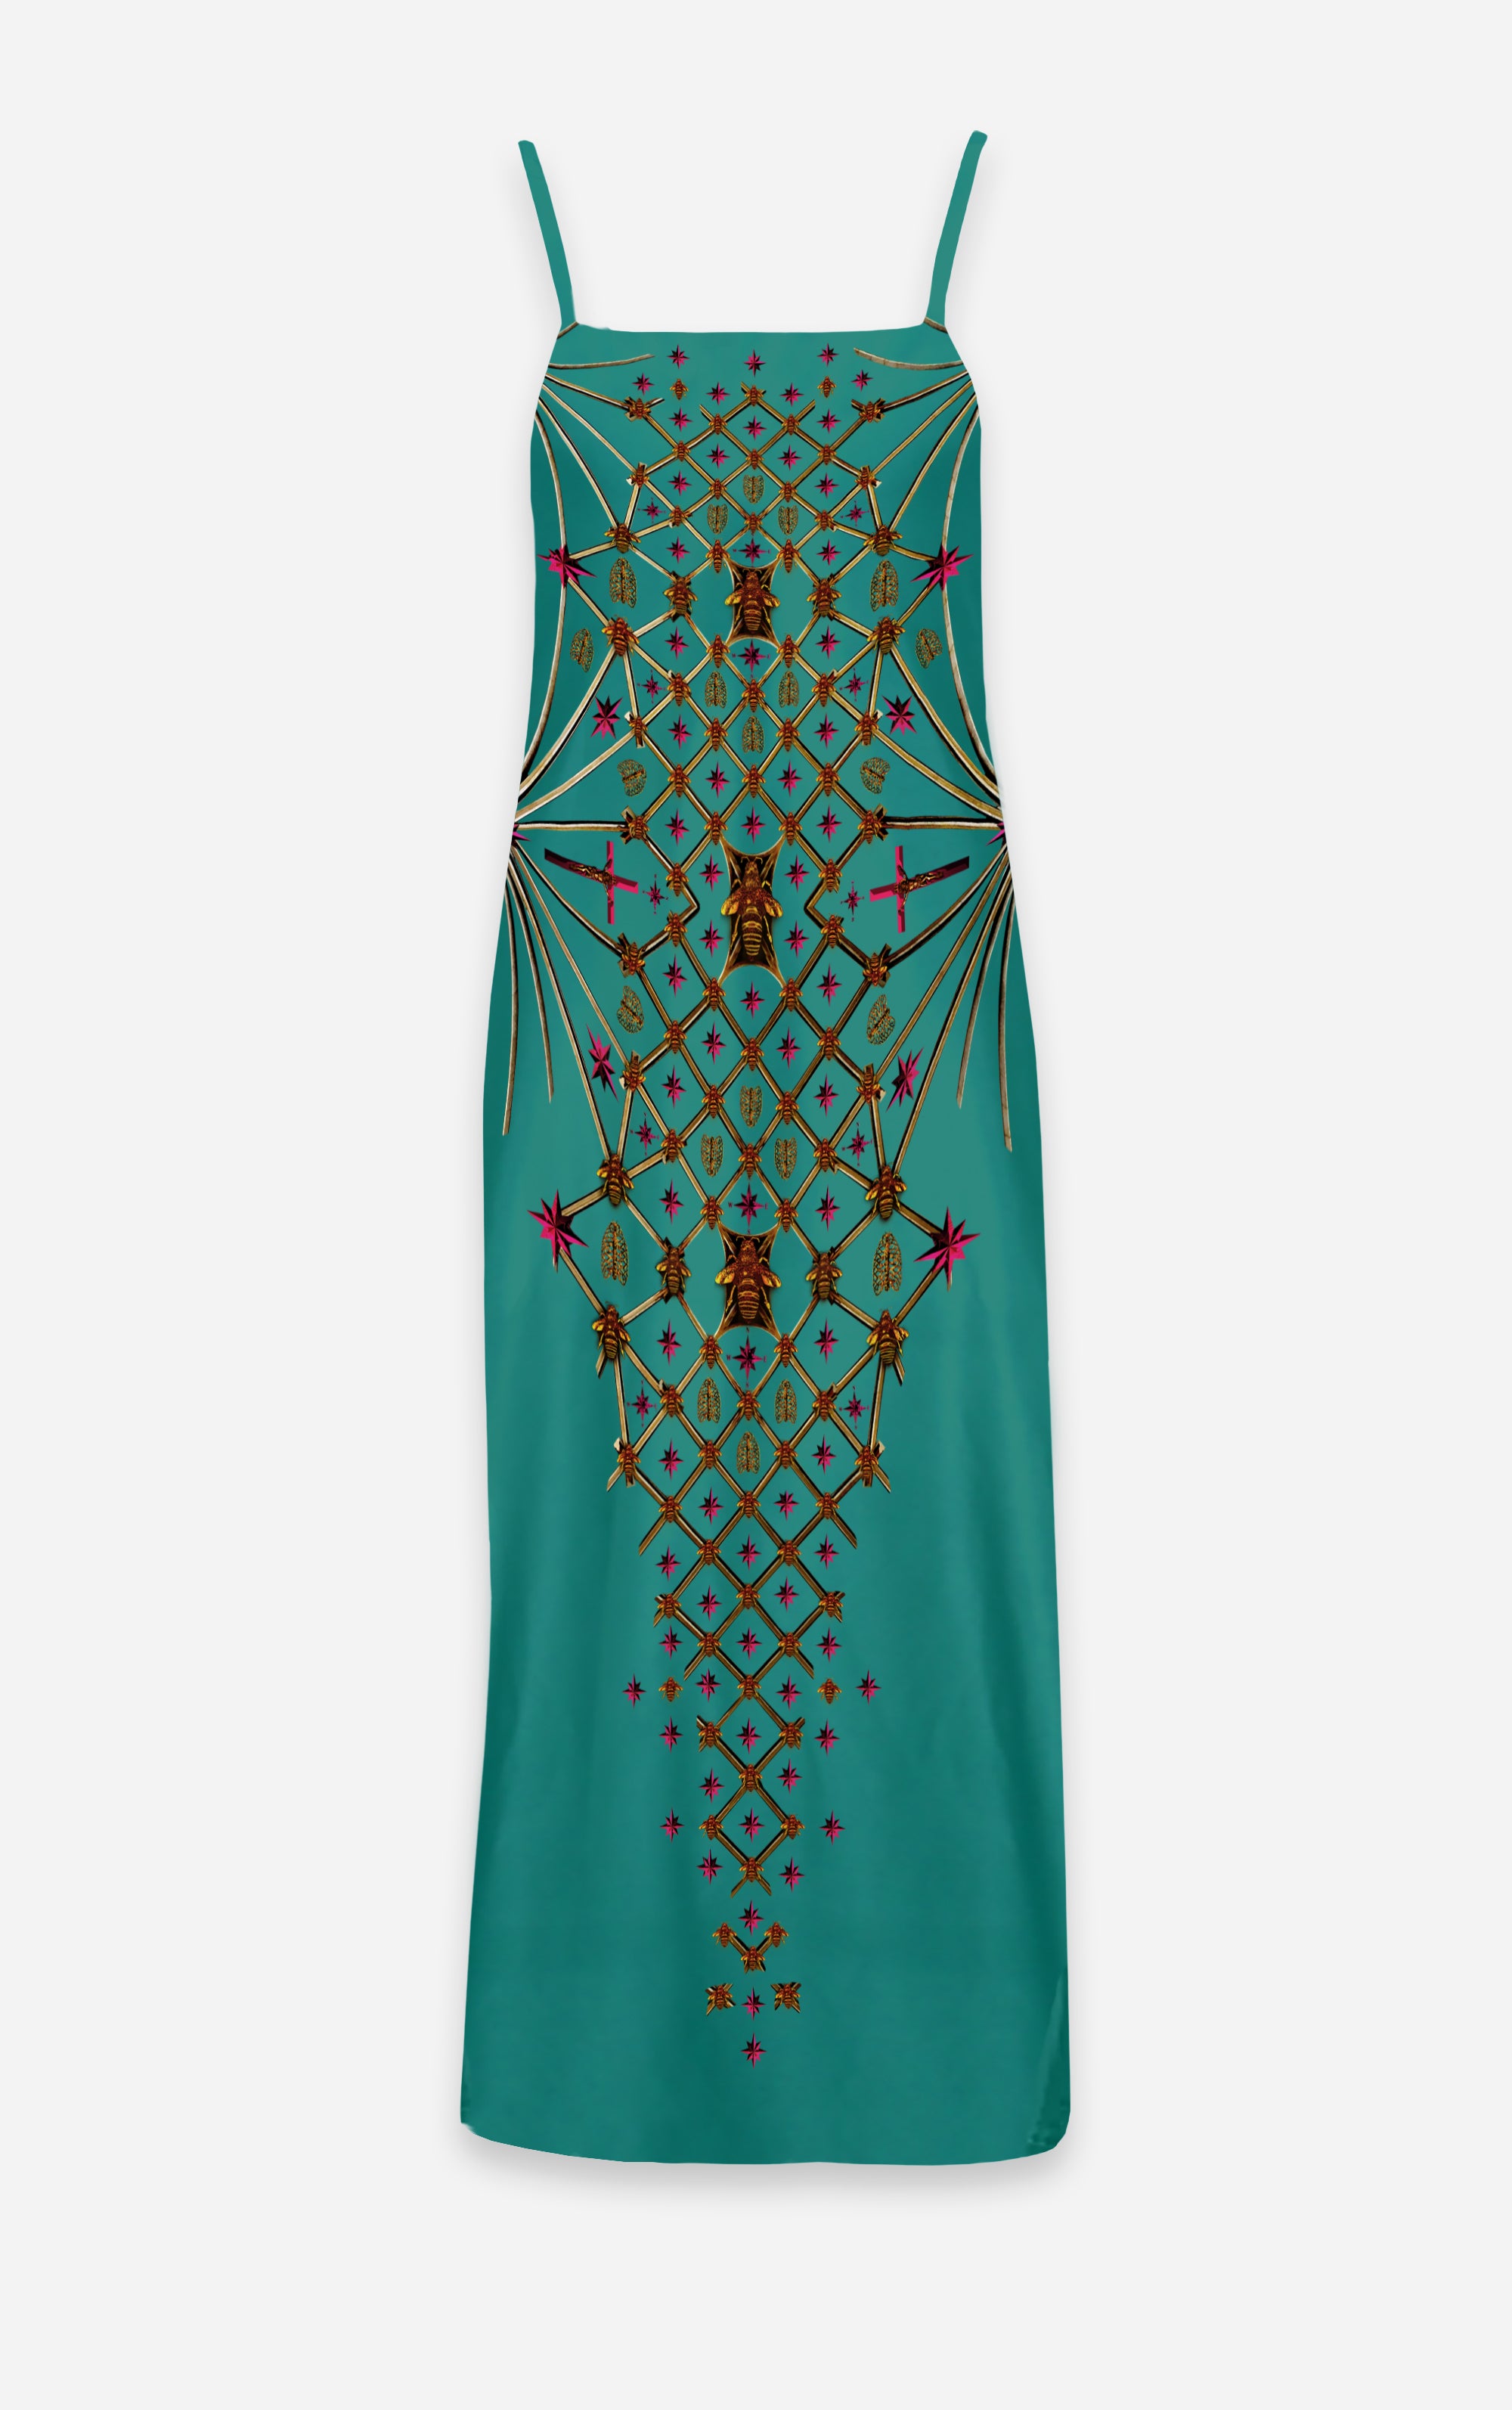 Vee Divergence- French Gothic V Neck Slip Dress in Jade Teal | Le Leanian™